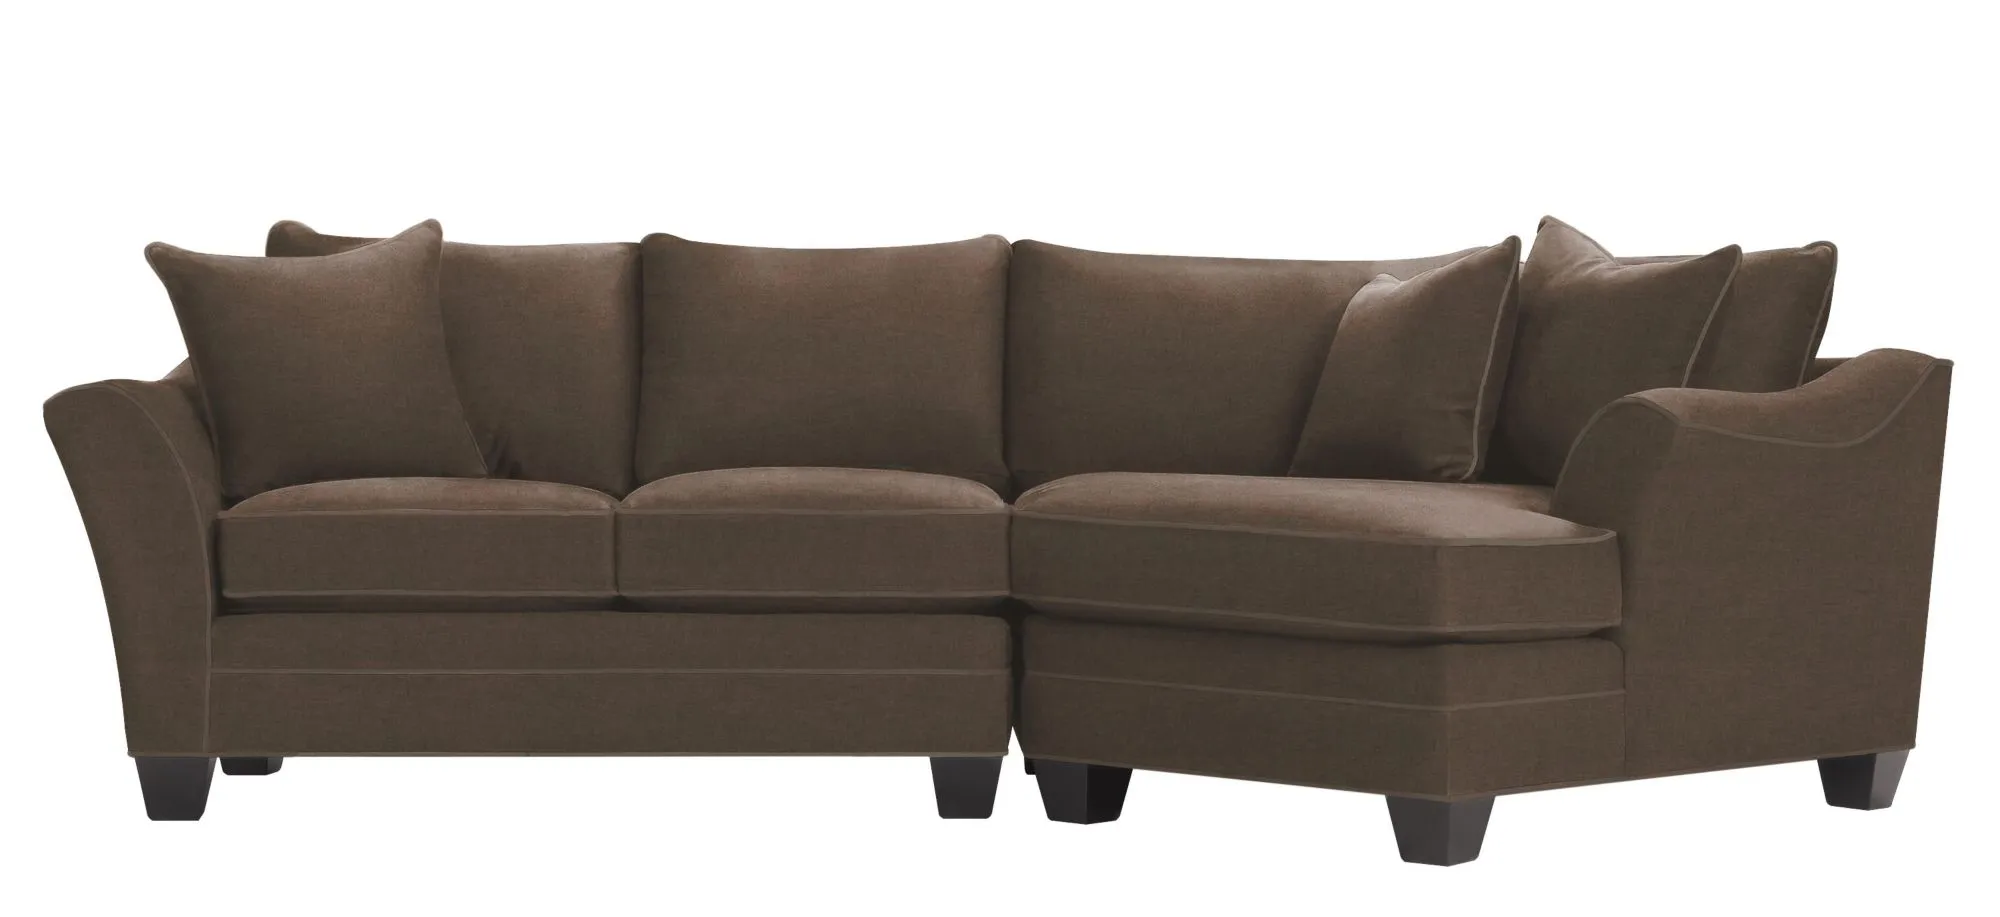 Foresthill 2-pc. Right Hand Cuddler Sectional Sofa in Santa Rosa Taupe by H.M. Richards